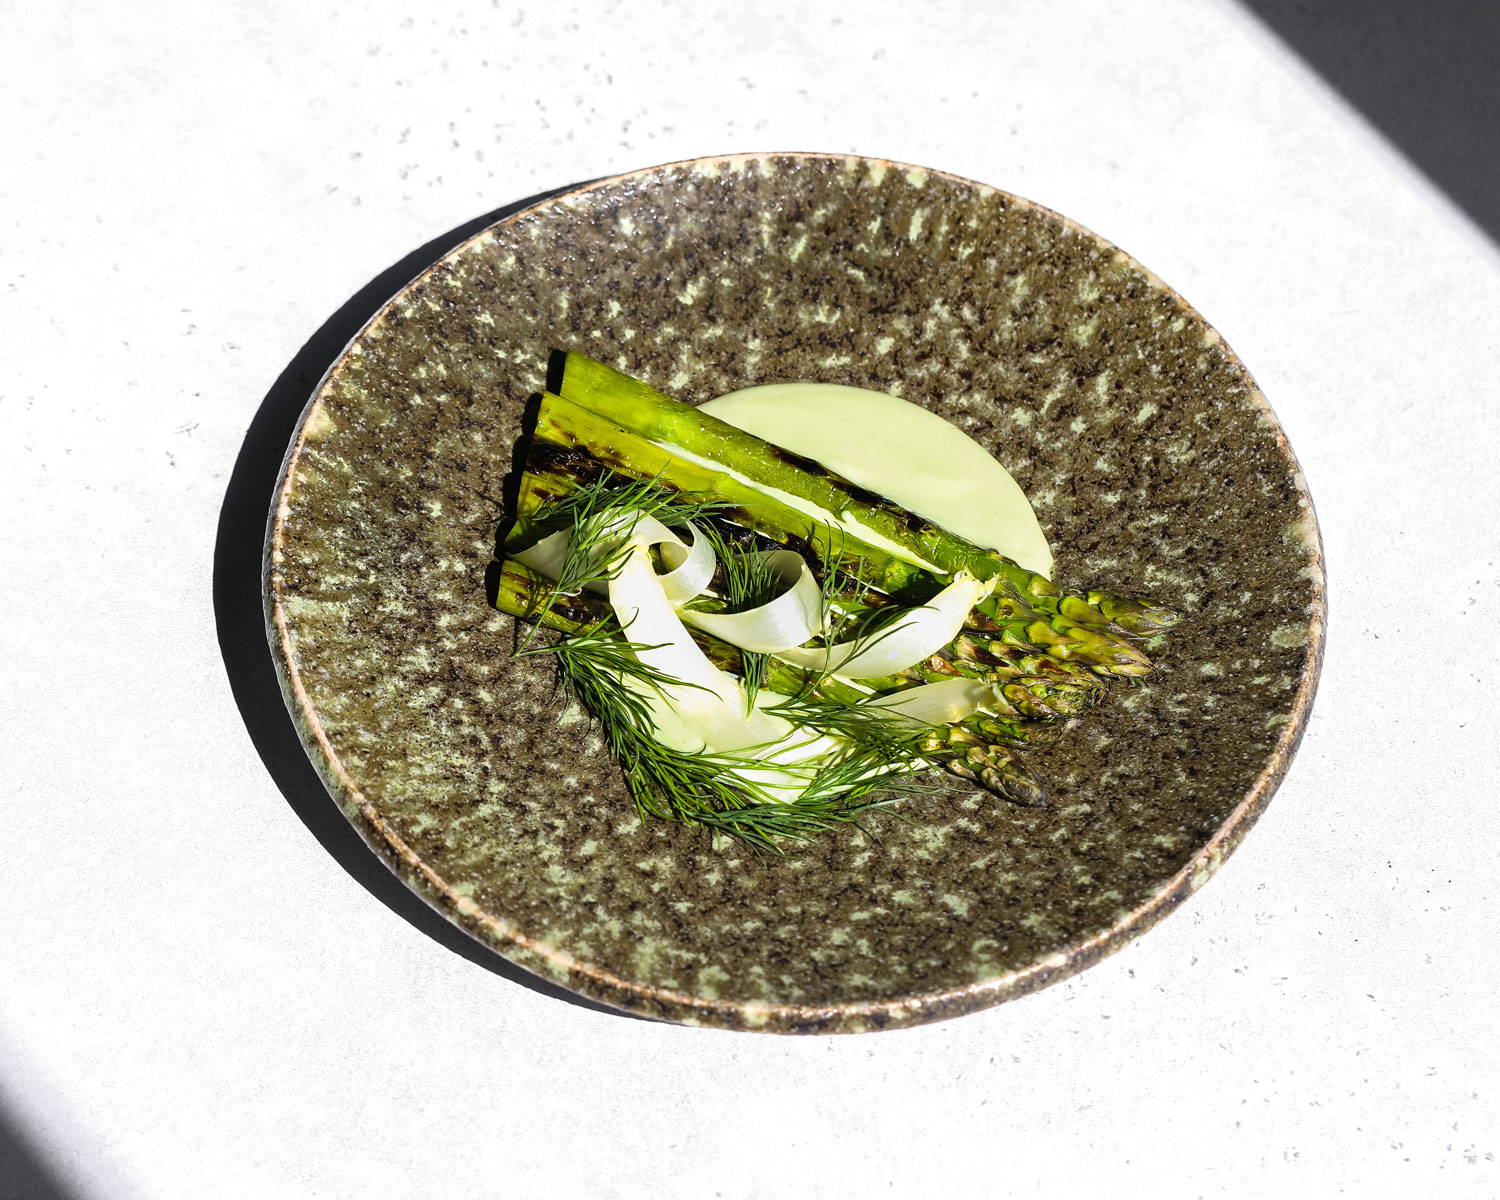 Tofu matcha sauce accompanying spears of asparagus, garnished with sprigs of fennel